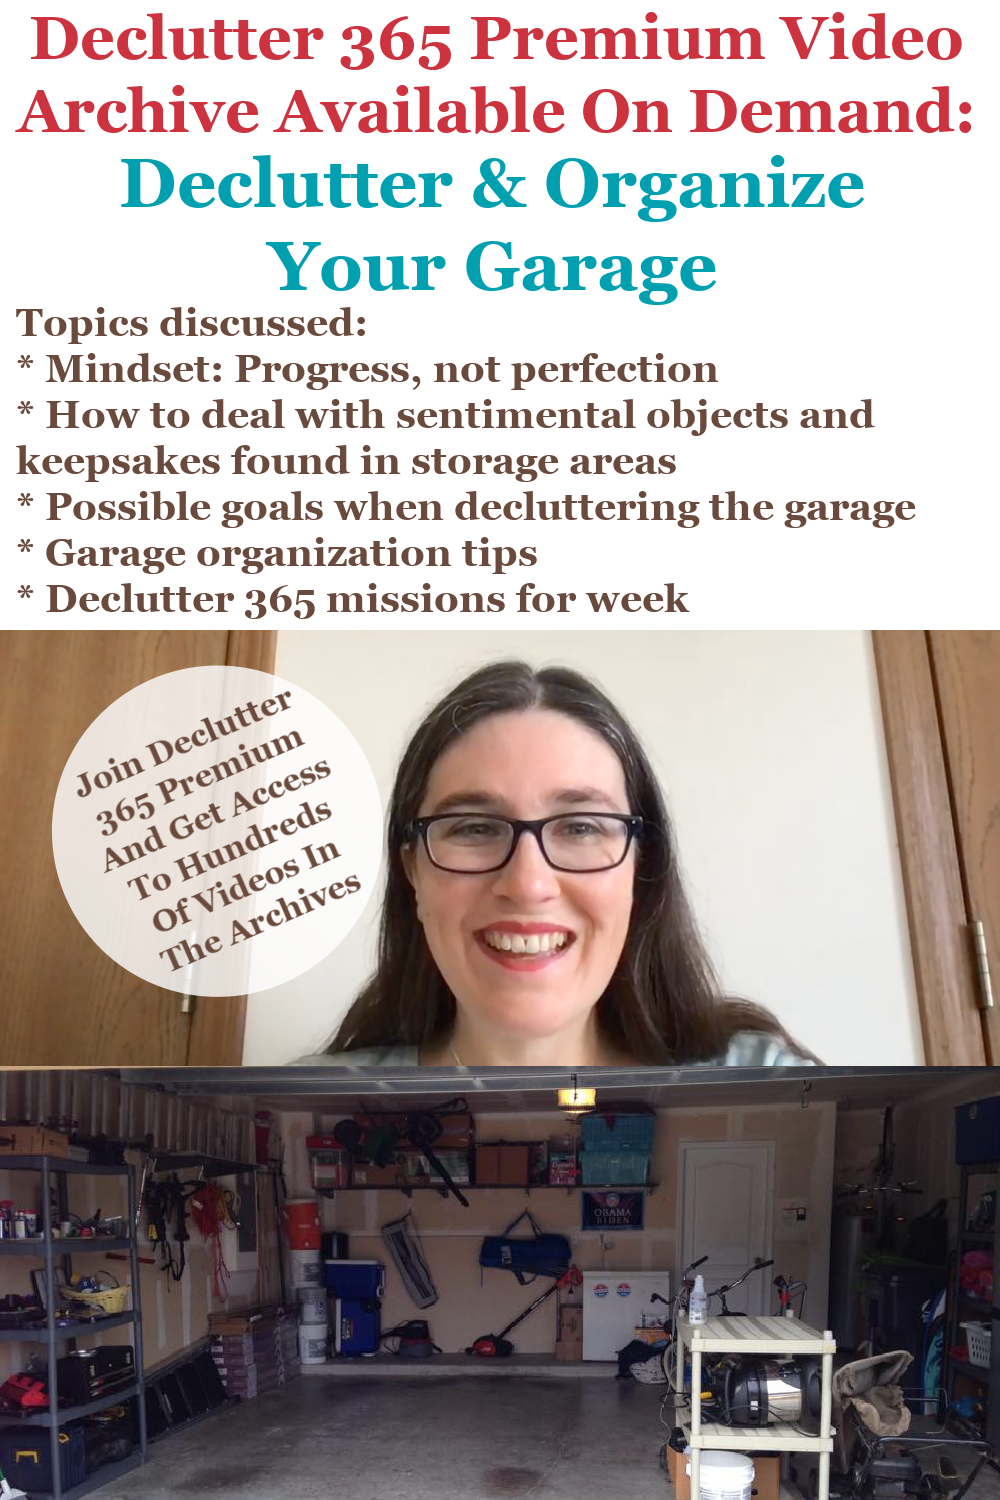 How to Organize Your Garage: Tips for Decluttering & Storage